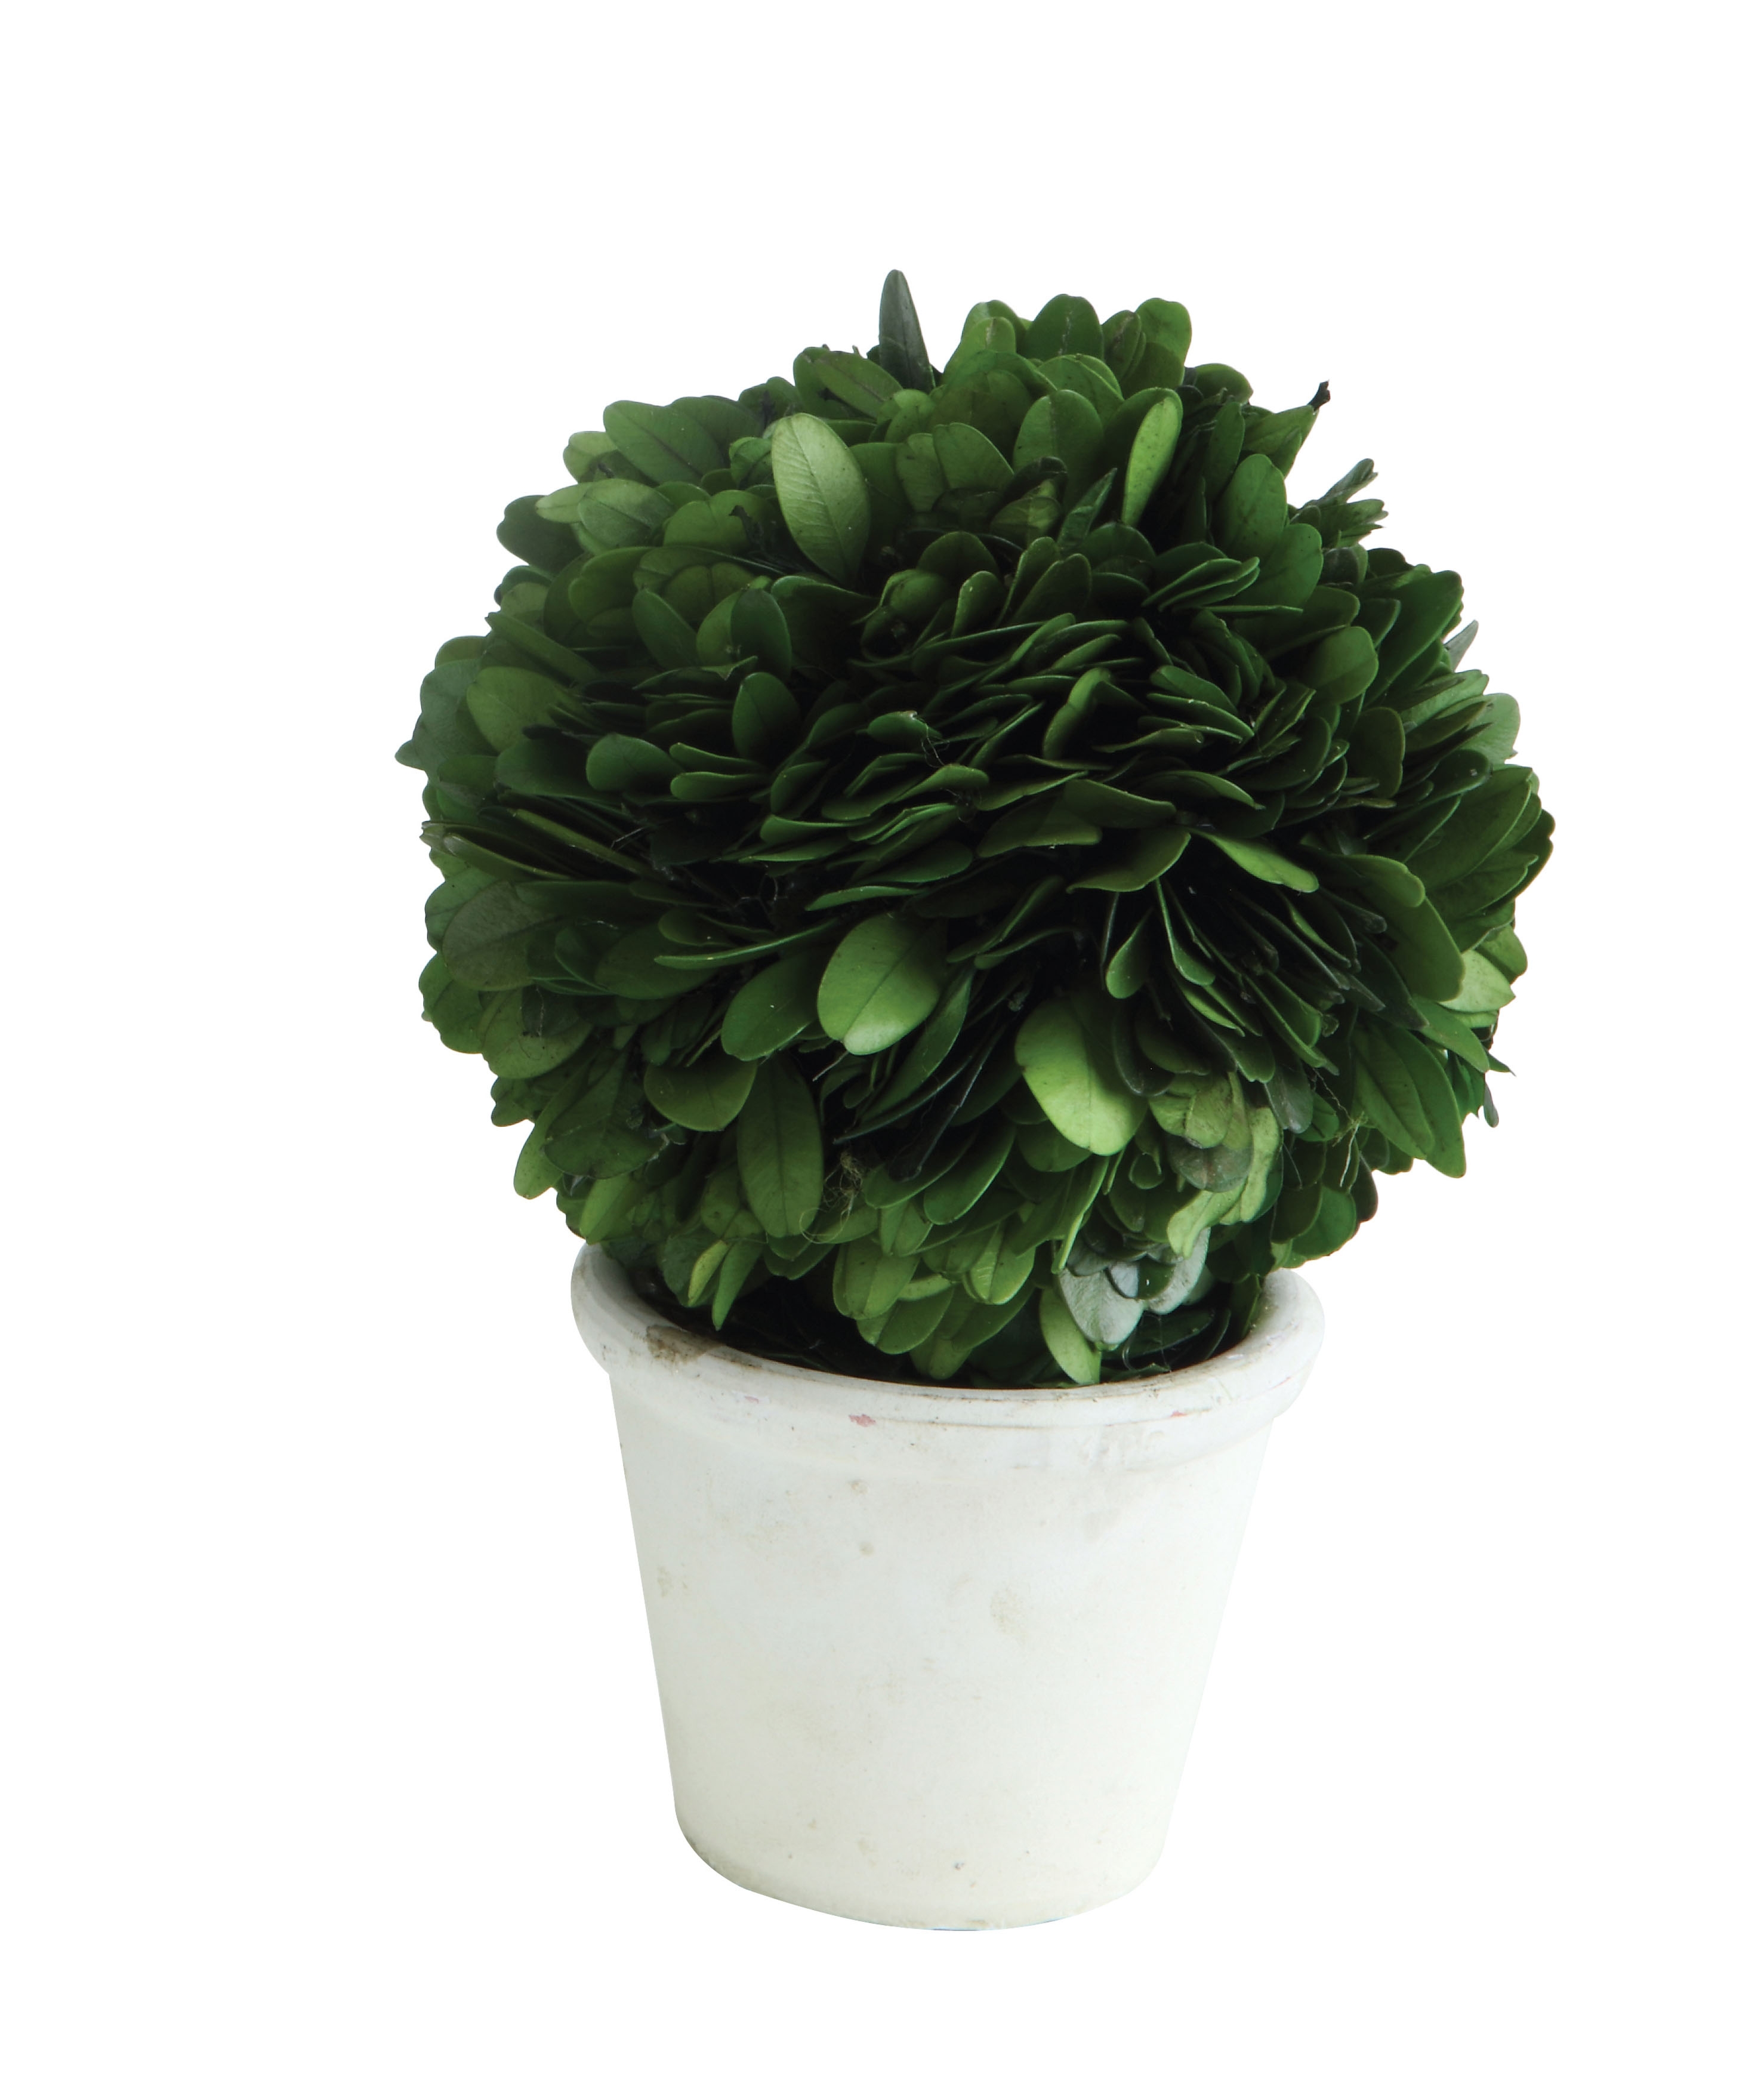 Preserved Boxwood Topiary in Clay Pot - Image 0